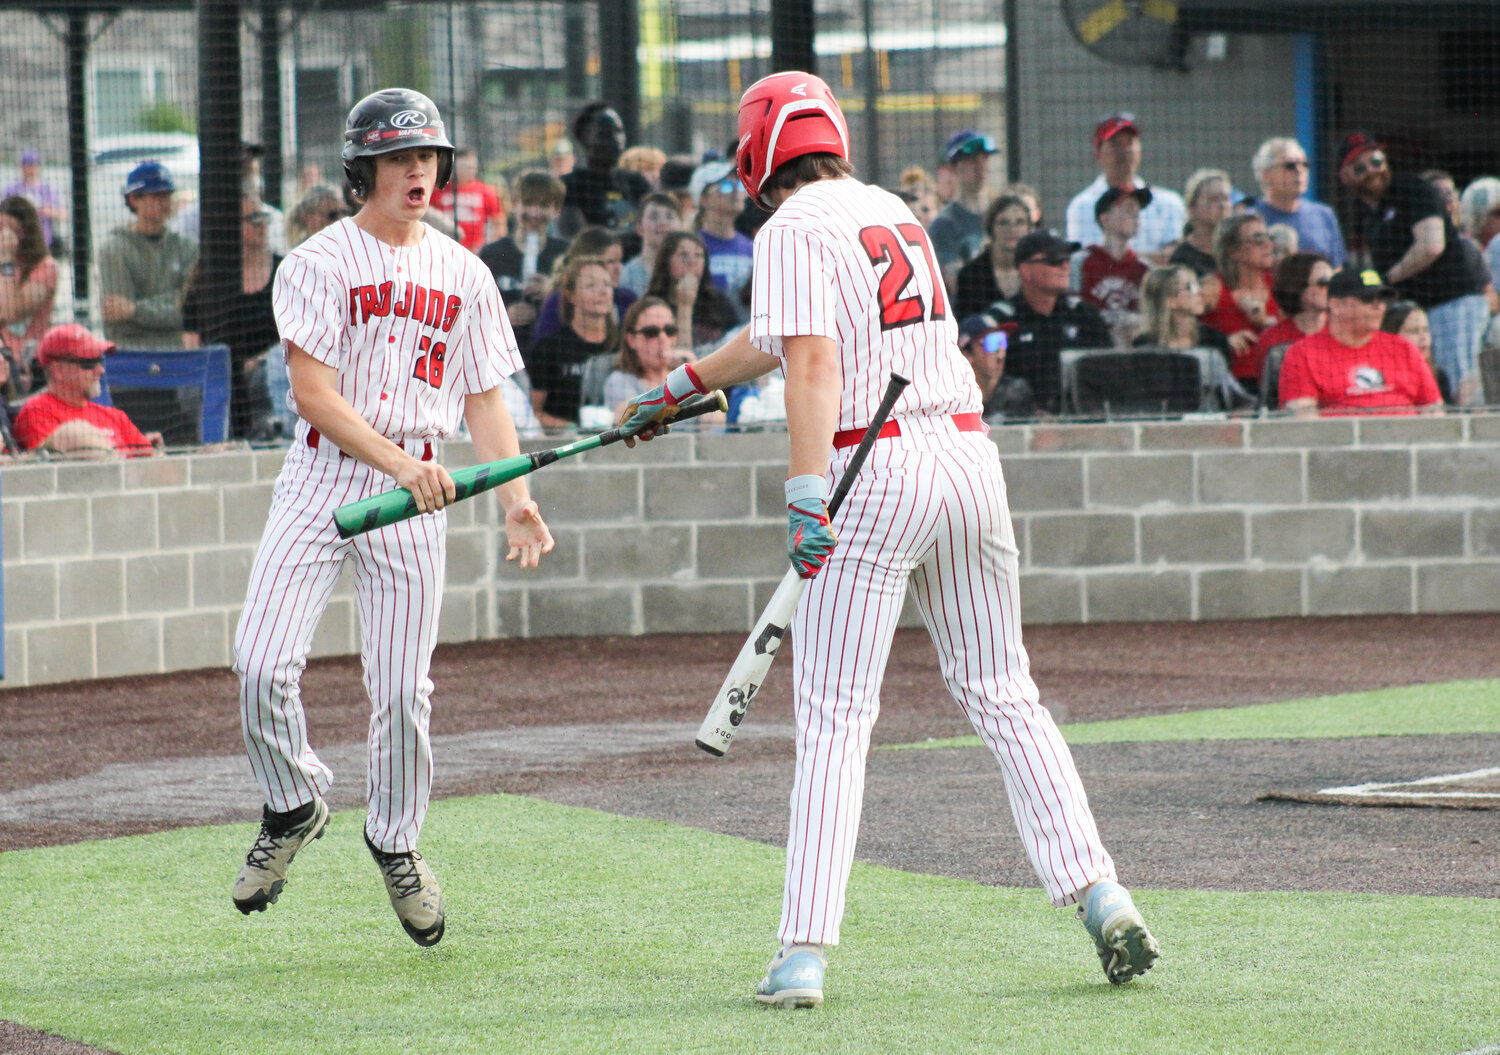 Community R-6 senior Tucker Cox takes a bat from senior Gavin Allen after scoring the first run Monday's playoff game in Parkville. Cox finished 2-for-3 with an RBI and two runs from the No. 9 spot.